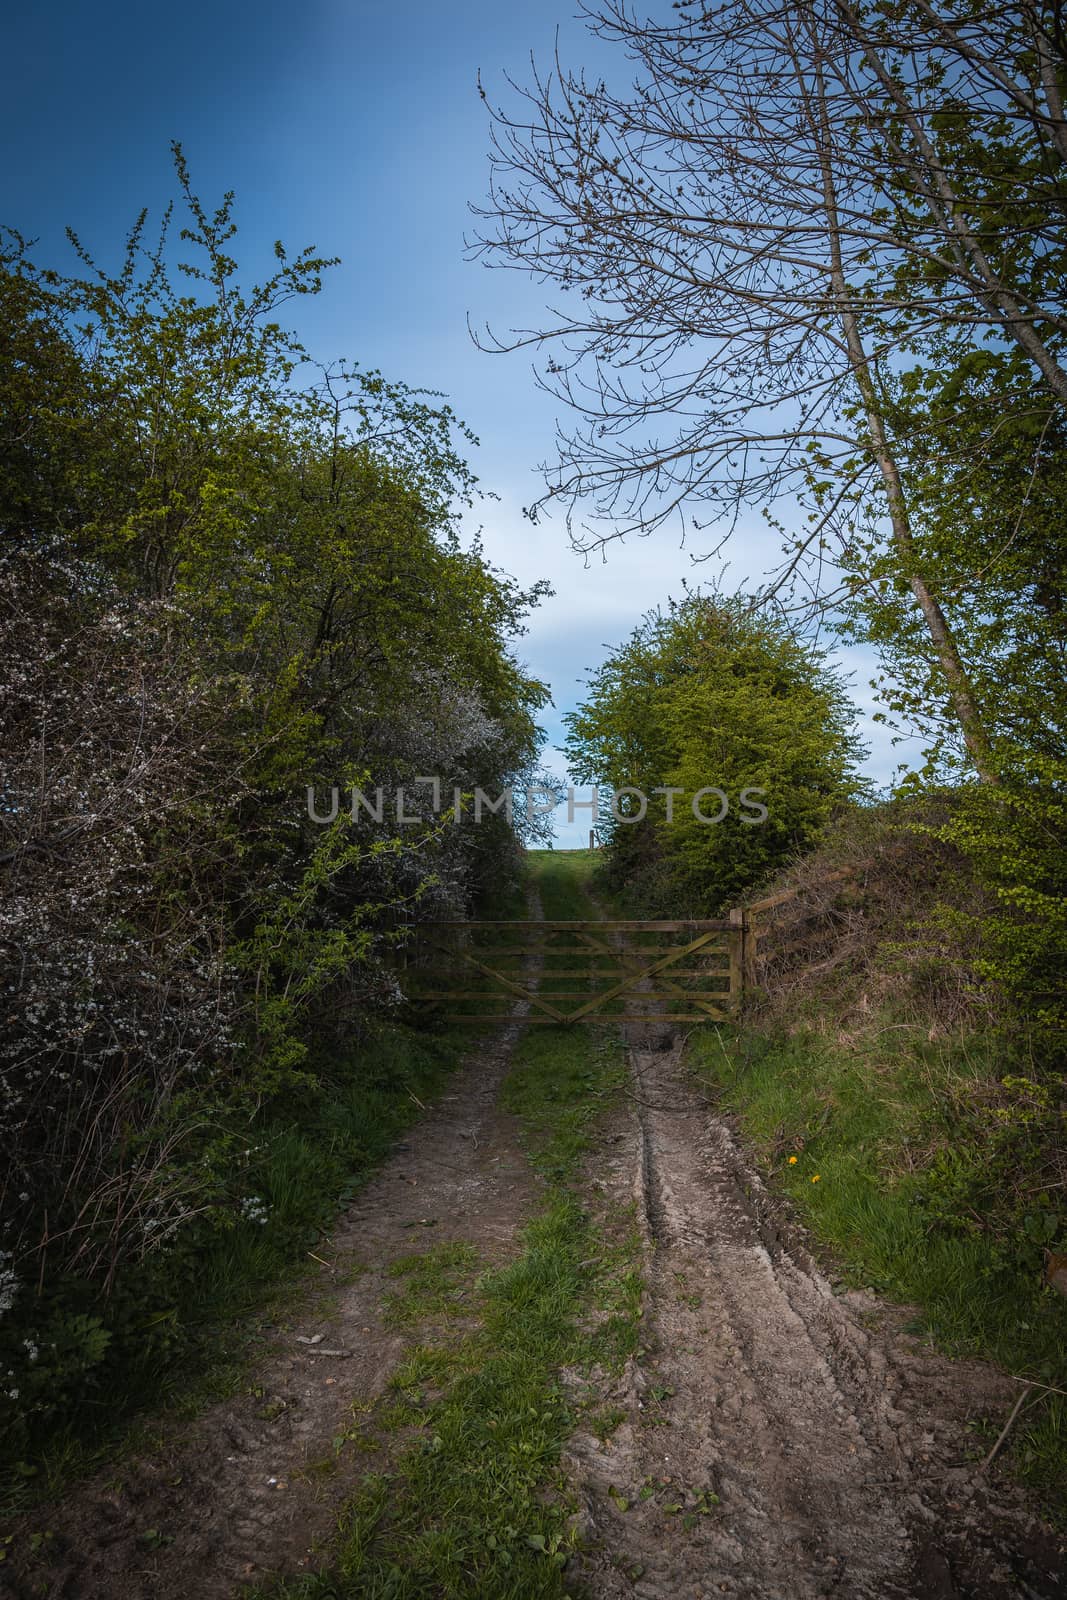 An old rustic wooden farm gate in the countryside with a dirt track and trees